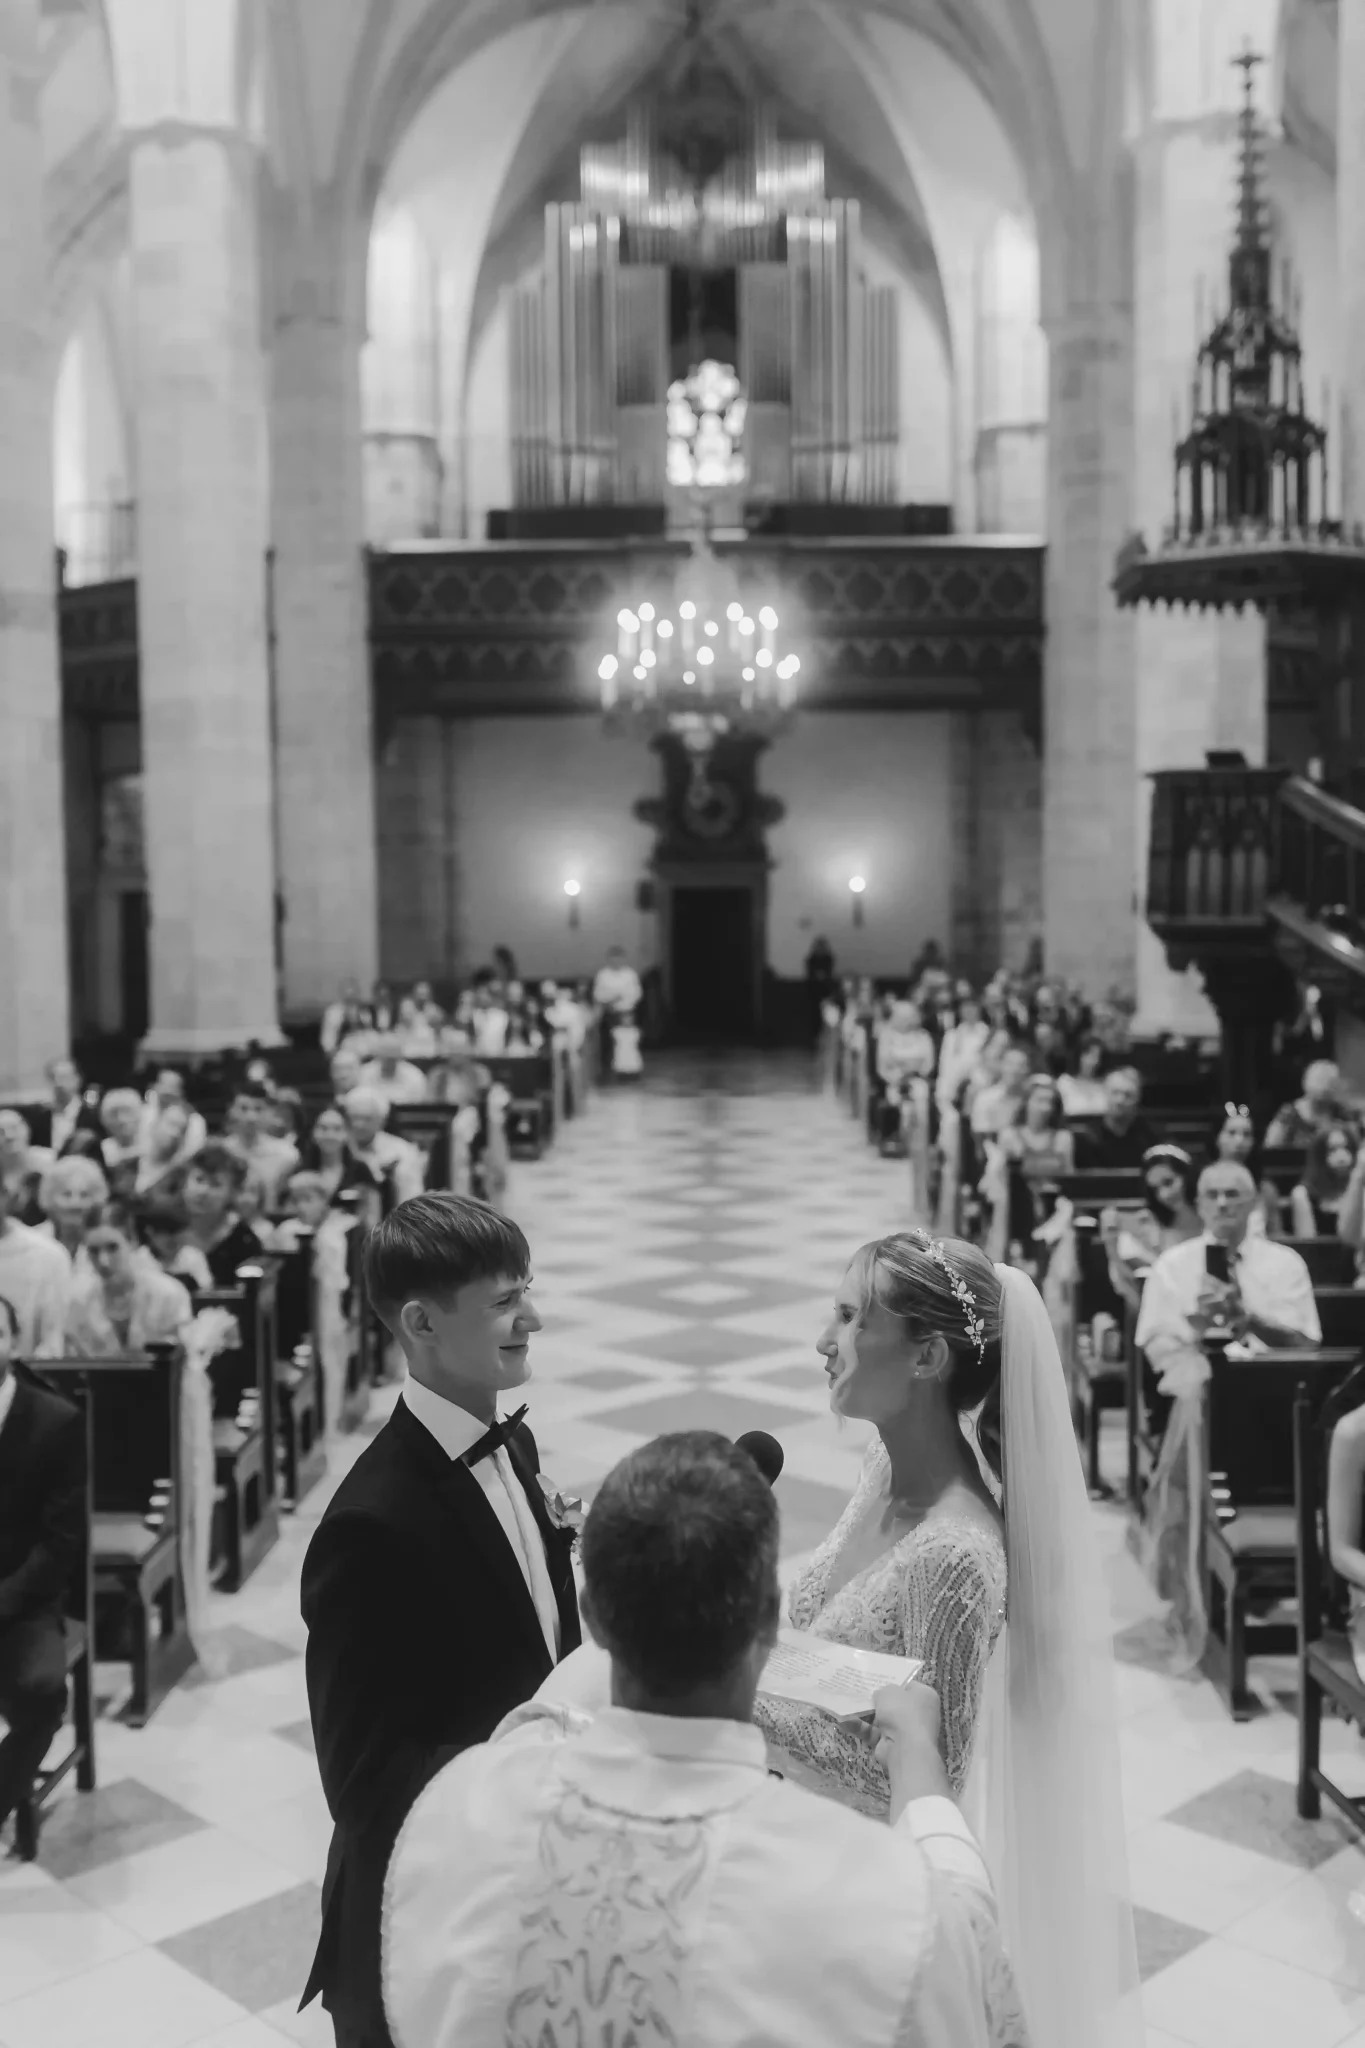 A bride and groom exchange vows in a church.